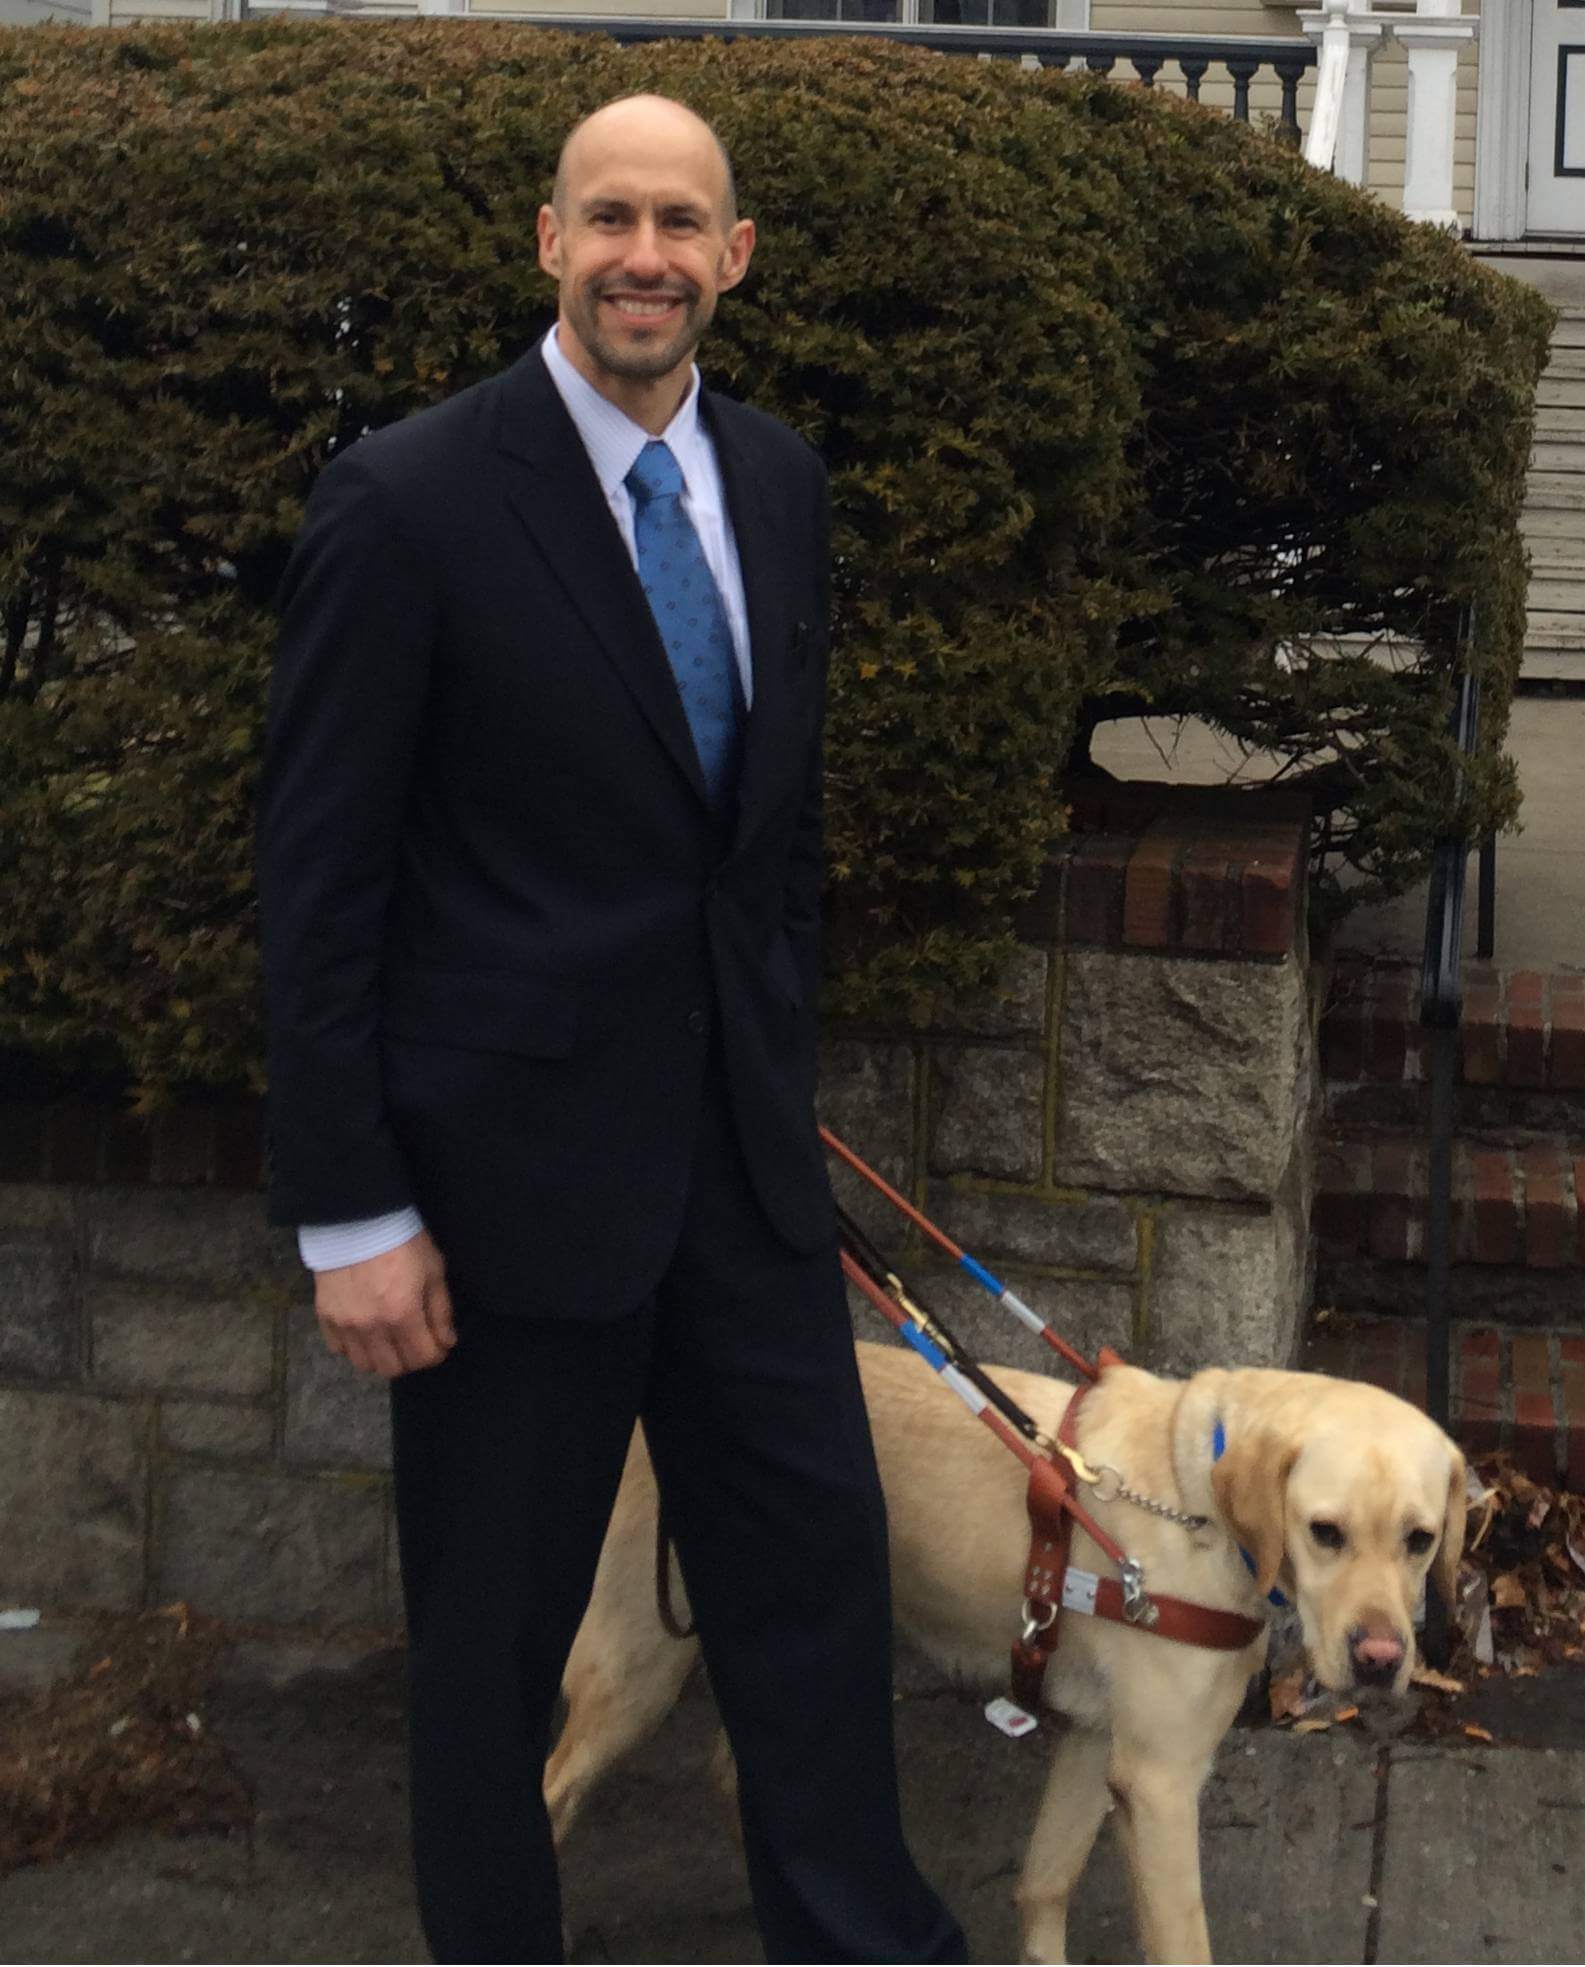 Guiding Eyes CEO Tom Panek with yellow Lab guide dog Gus